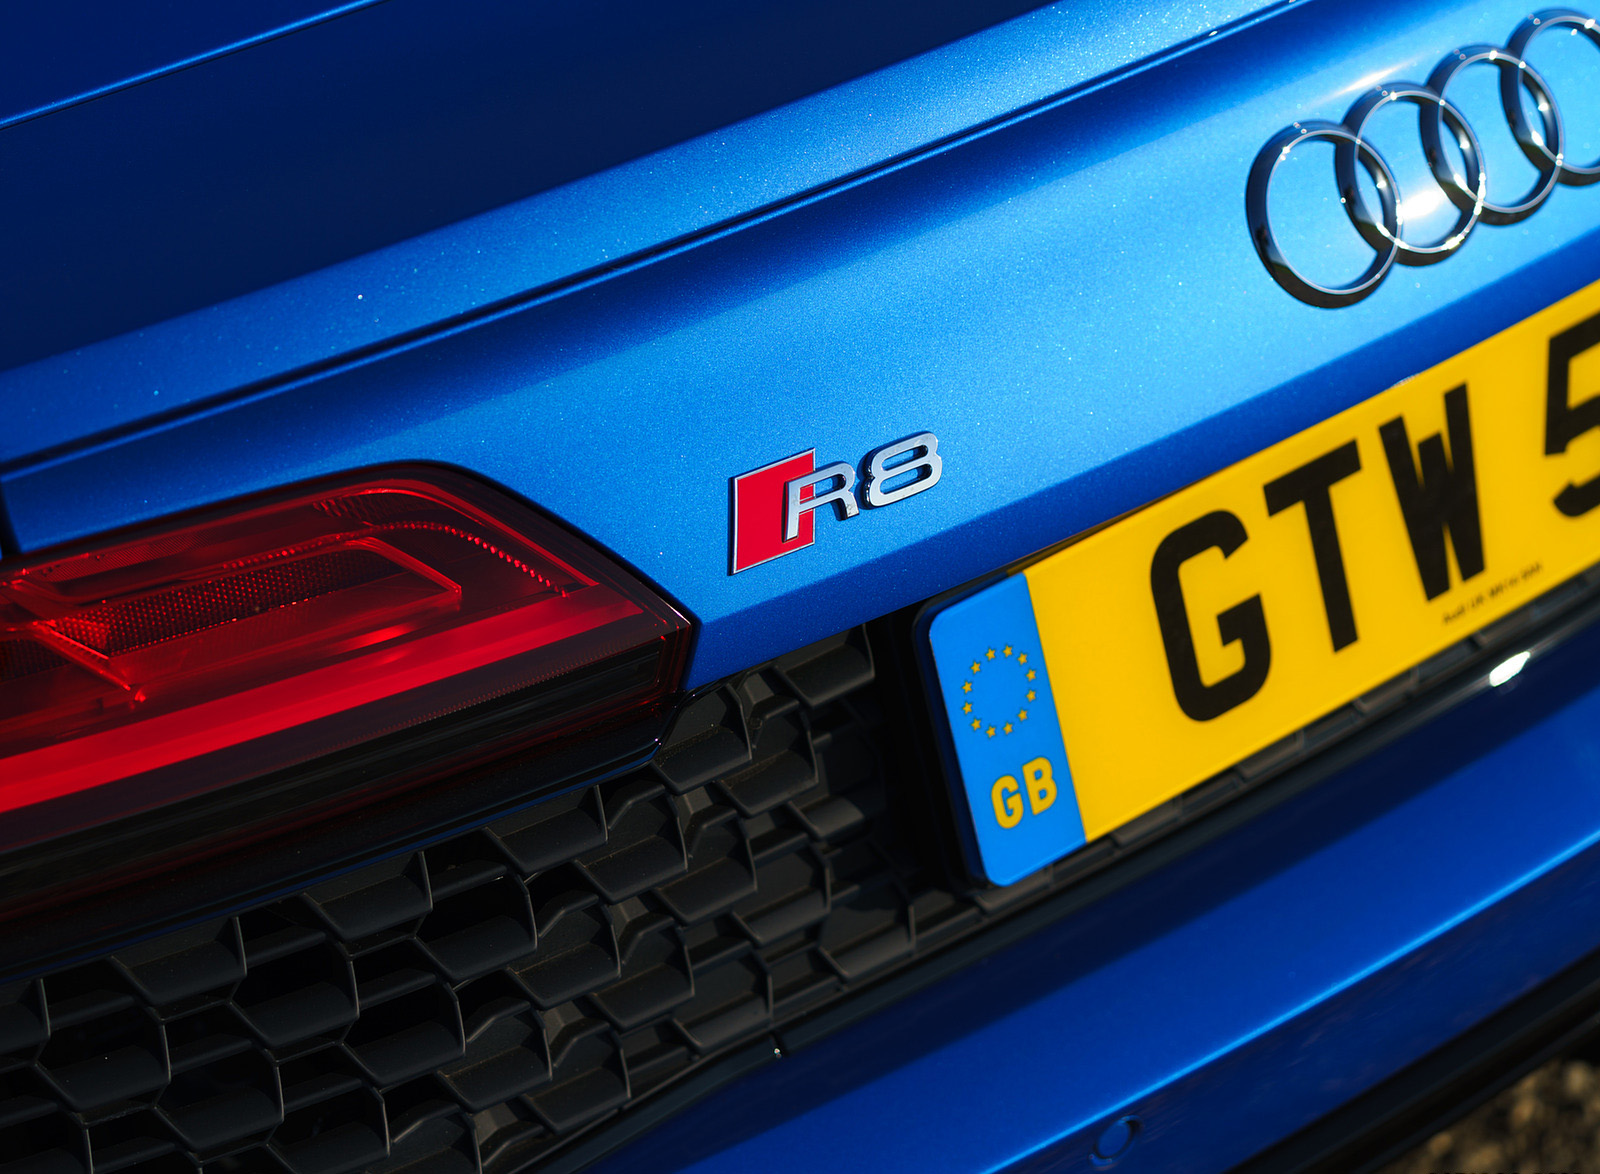 2020 Audi R8 V10 RWD Coupe (UK-Spec) Badge Wallpapers #112 of 151